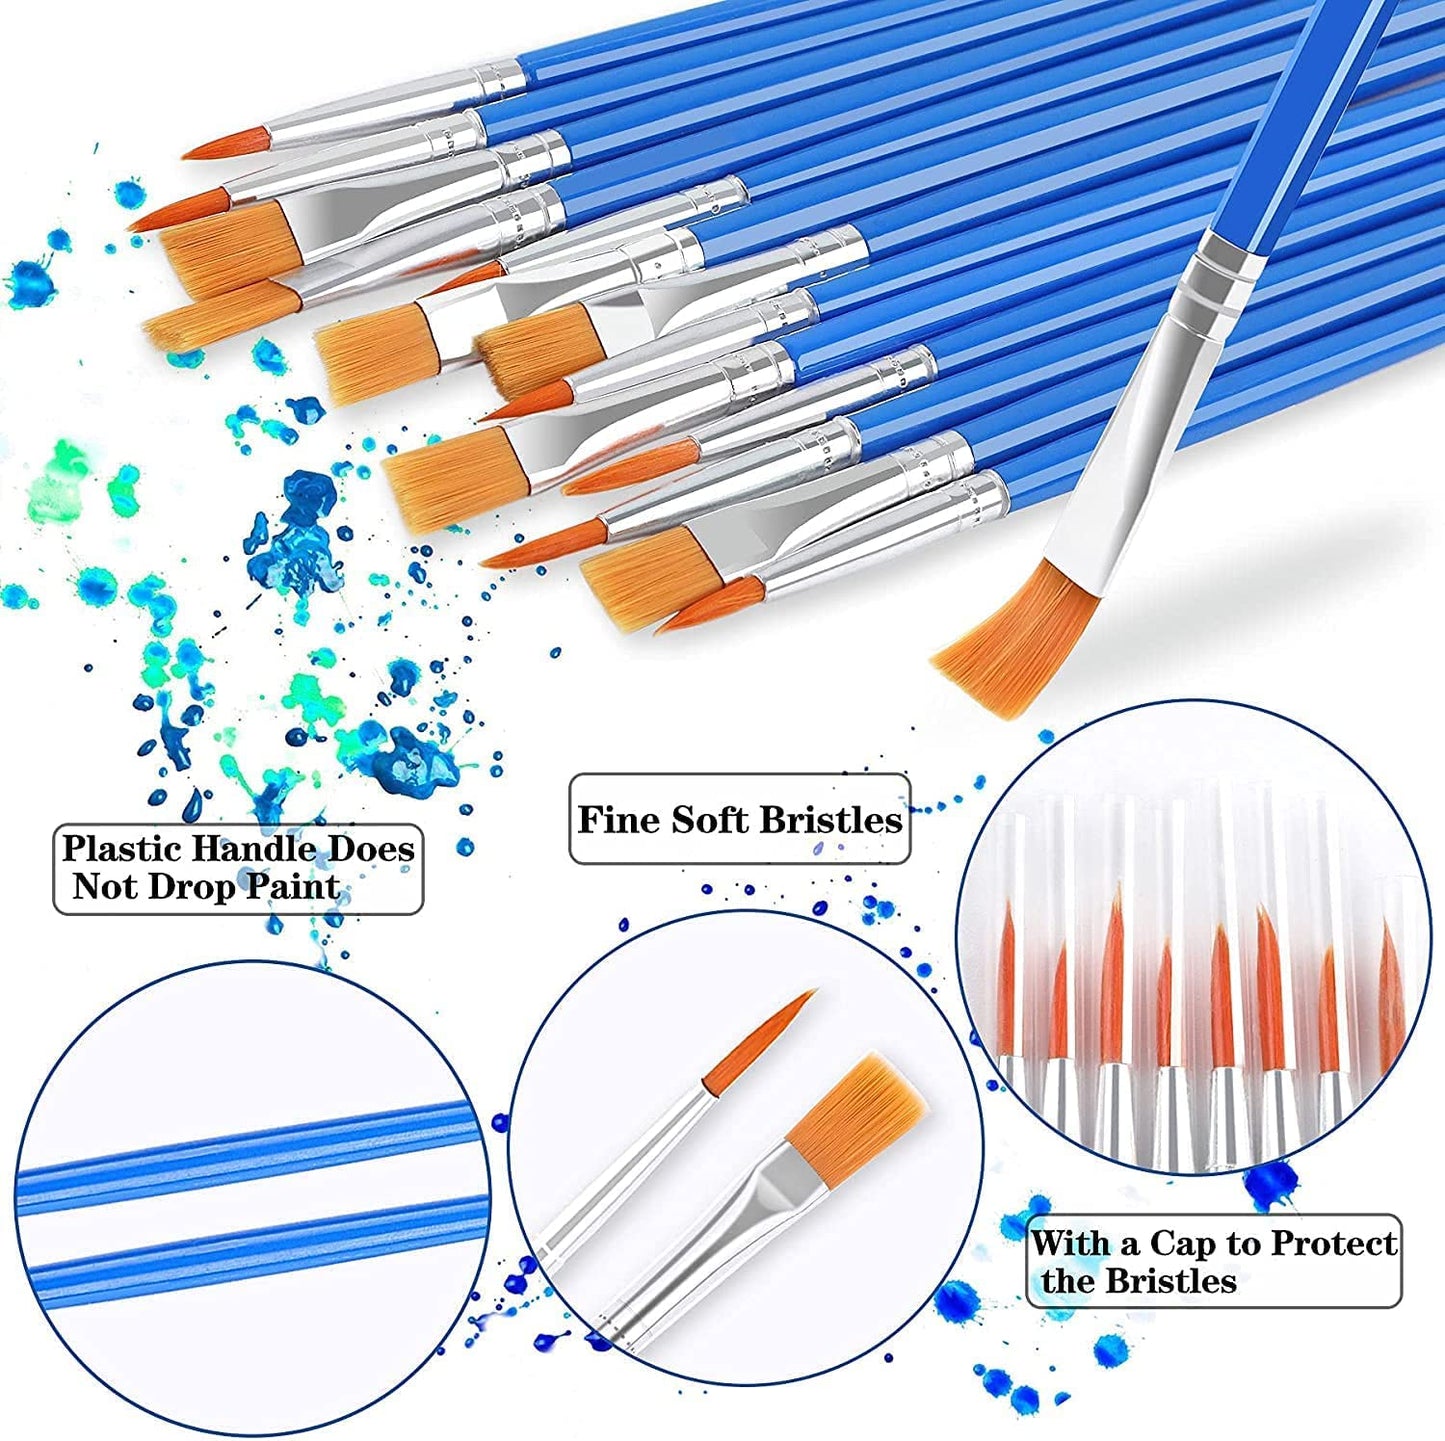 60 PCS Paint Brushes, Oil paintbrush, Round Flat Small Brush Bulk, Artist Paint brushes, Easy Use and Maintenance, Suitable For Detail Painting Flat Paint Brushes Sets, Blue